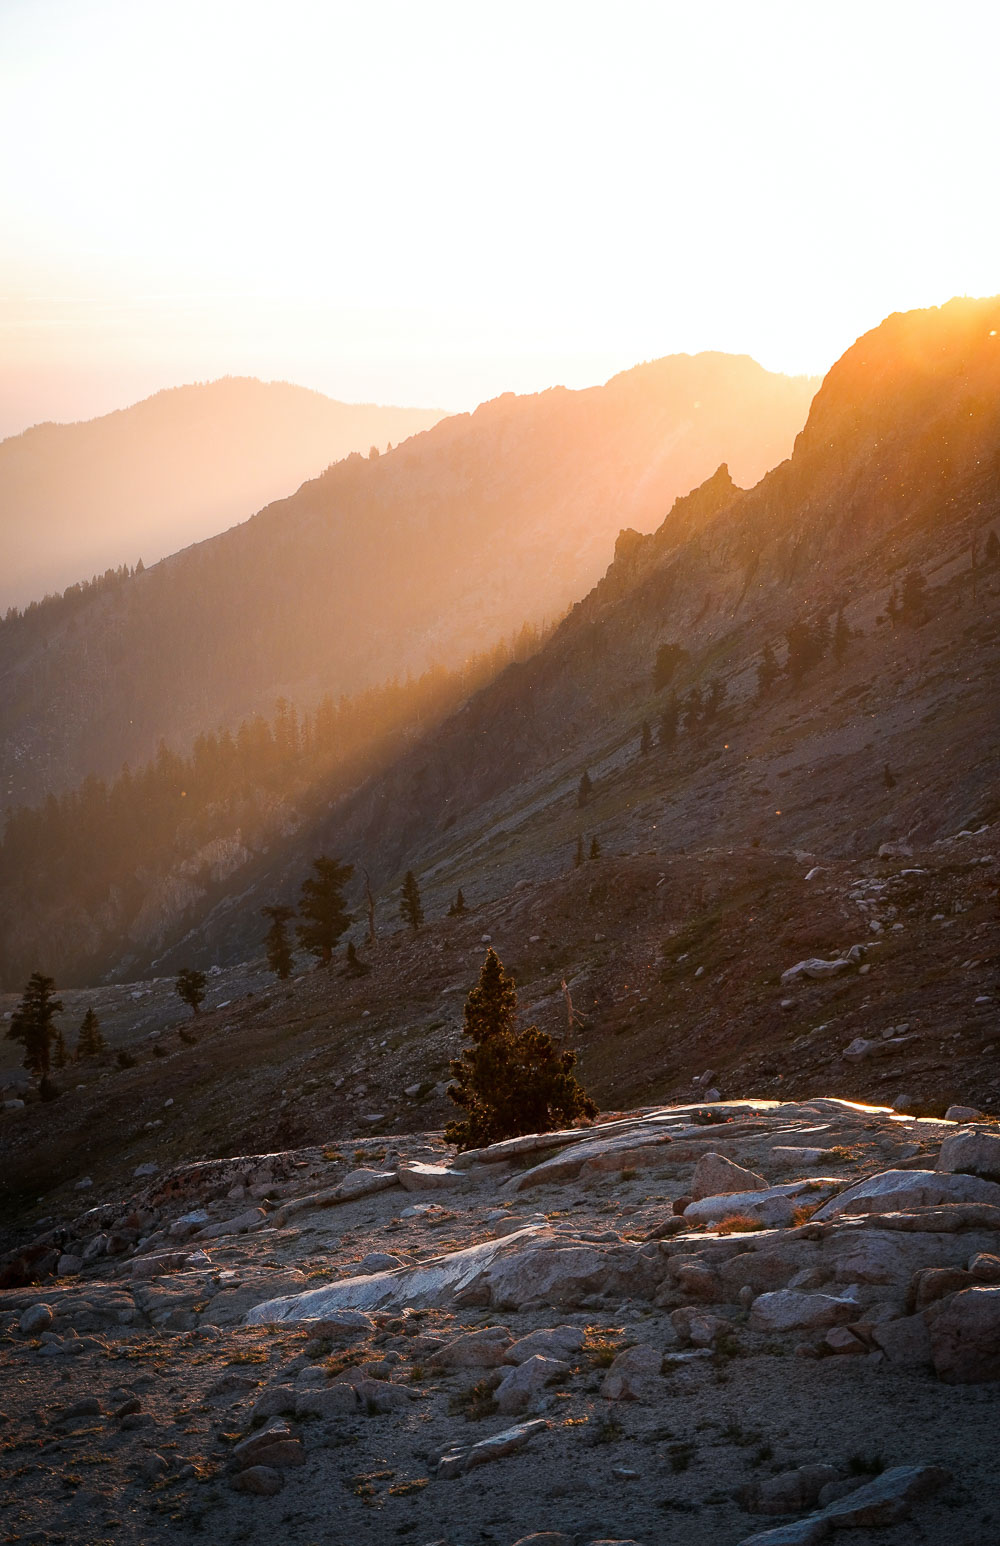 2 Days in Sequoia National Park - Roads and Destinations